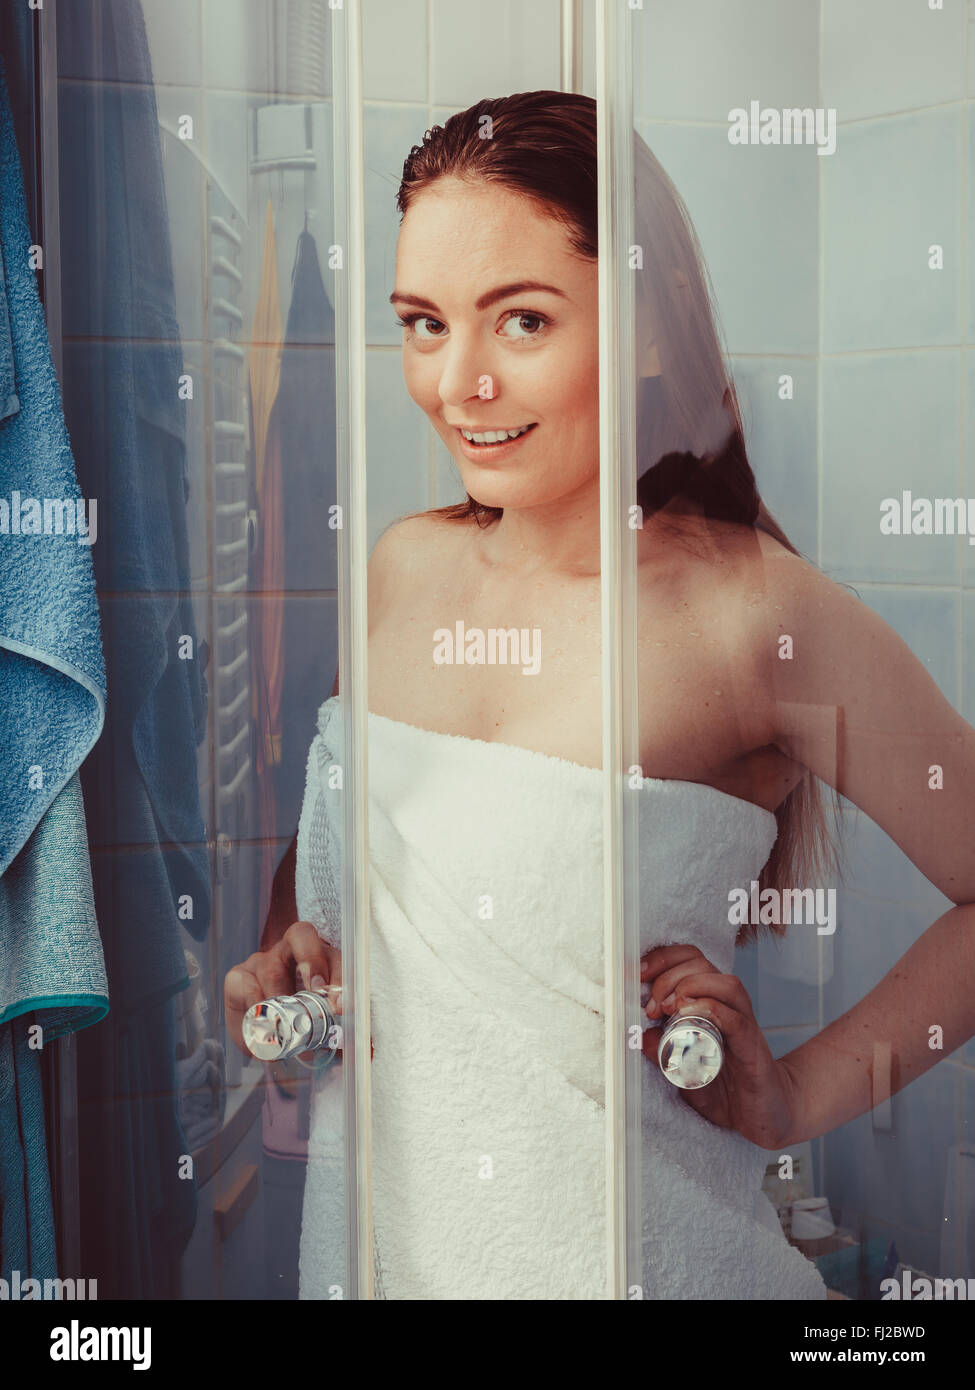 Girl showering in shower cabin enclosure. Woman taking care of hygiene in  bathroom Stock Photo - Alamy